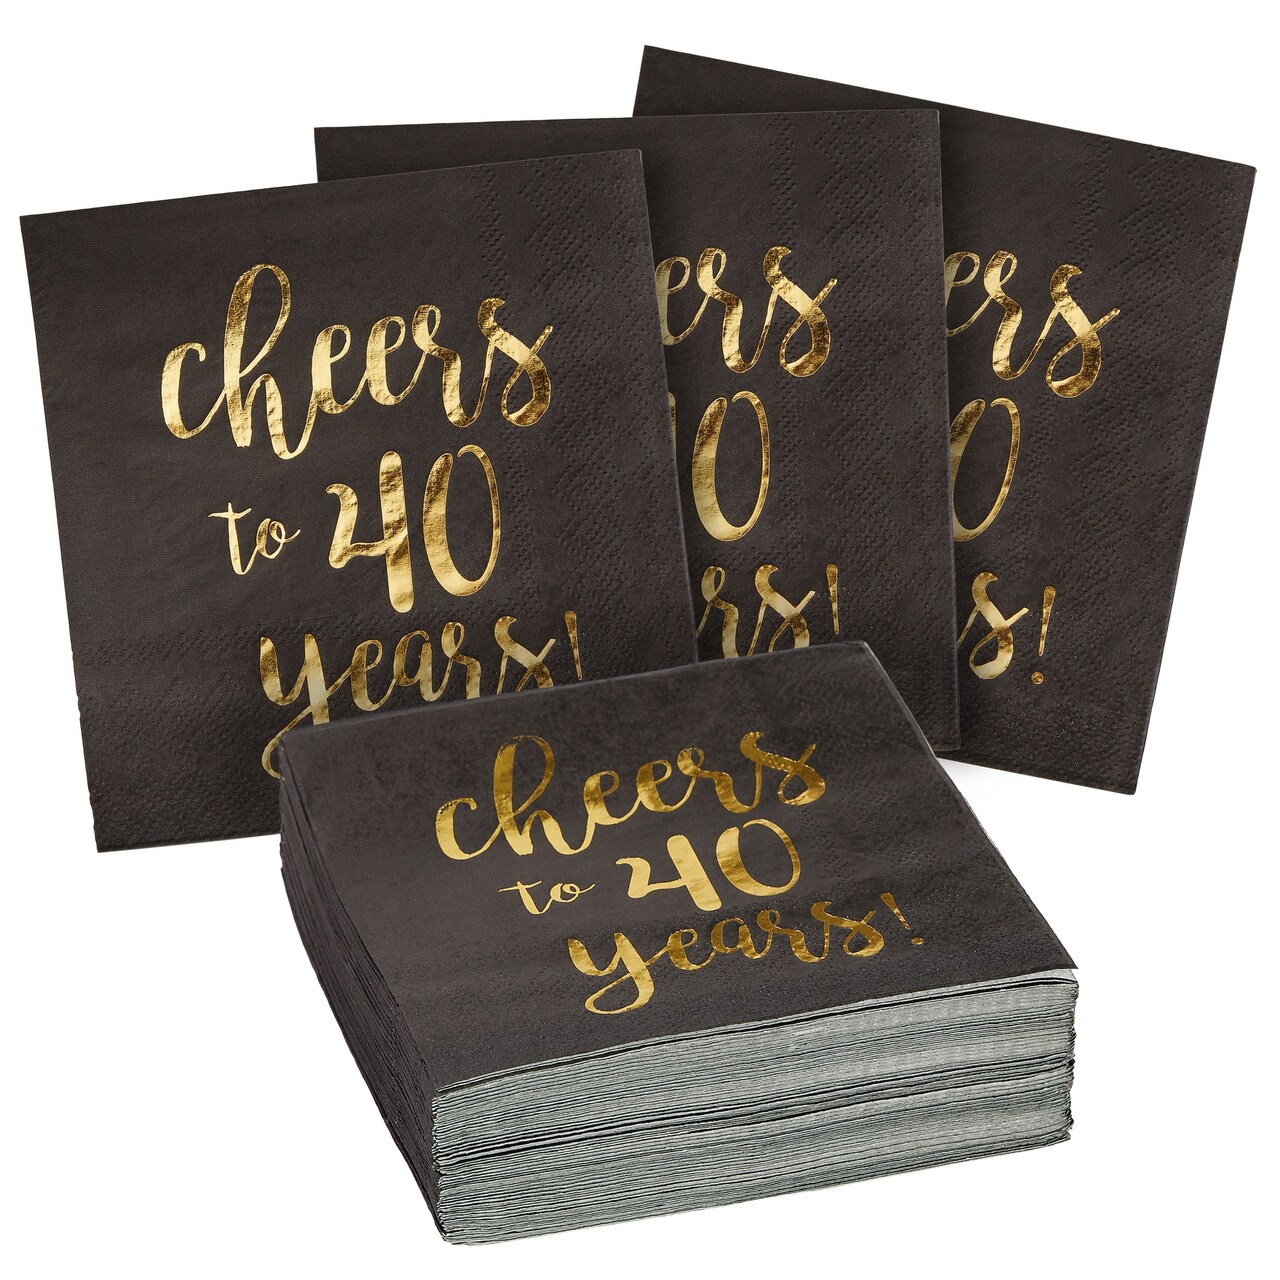 50 Pack Cheers to 40 Years Cocktail Napkins for 40th Birthday, Anniversary Party Supplies, 3-Ply, Black and Gold Foil (5 x 5 In)